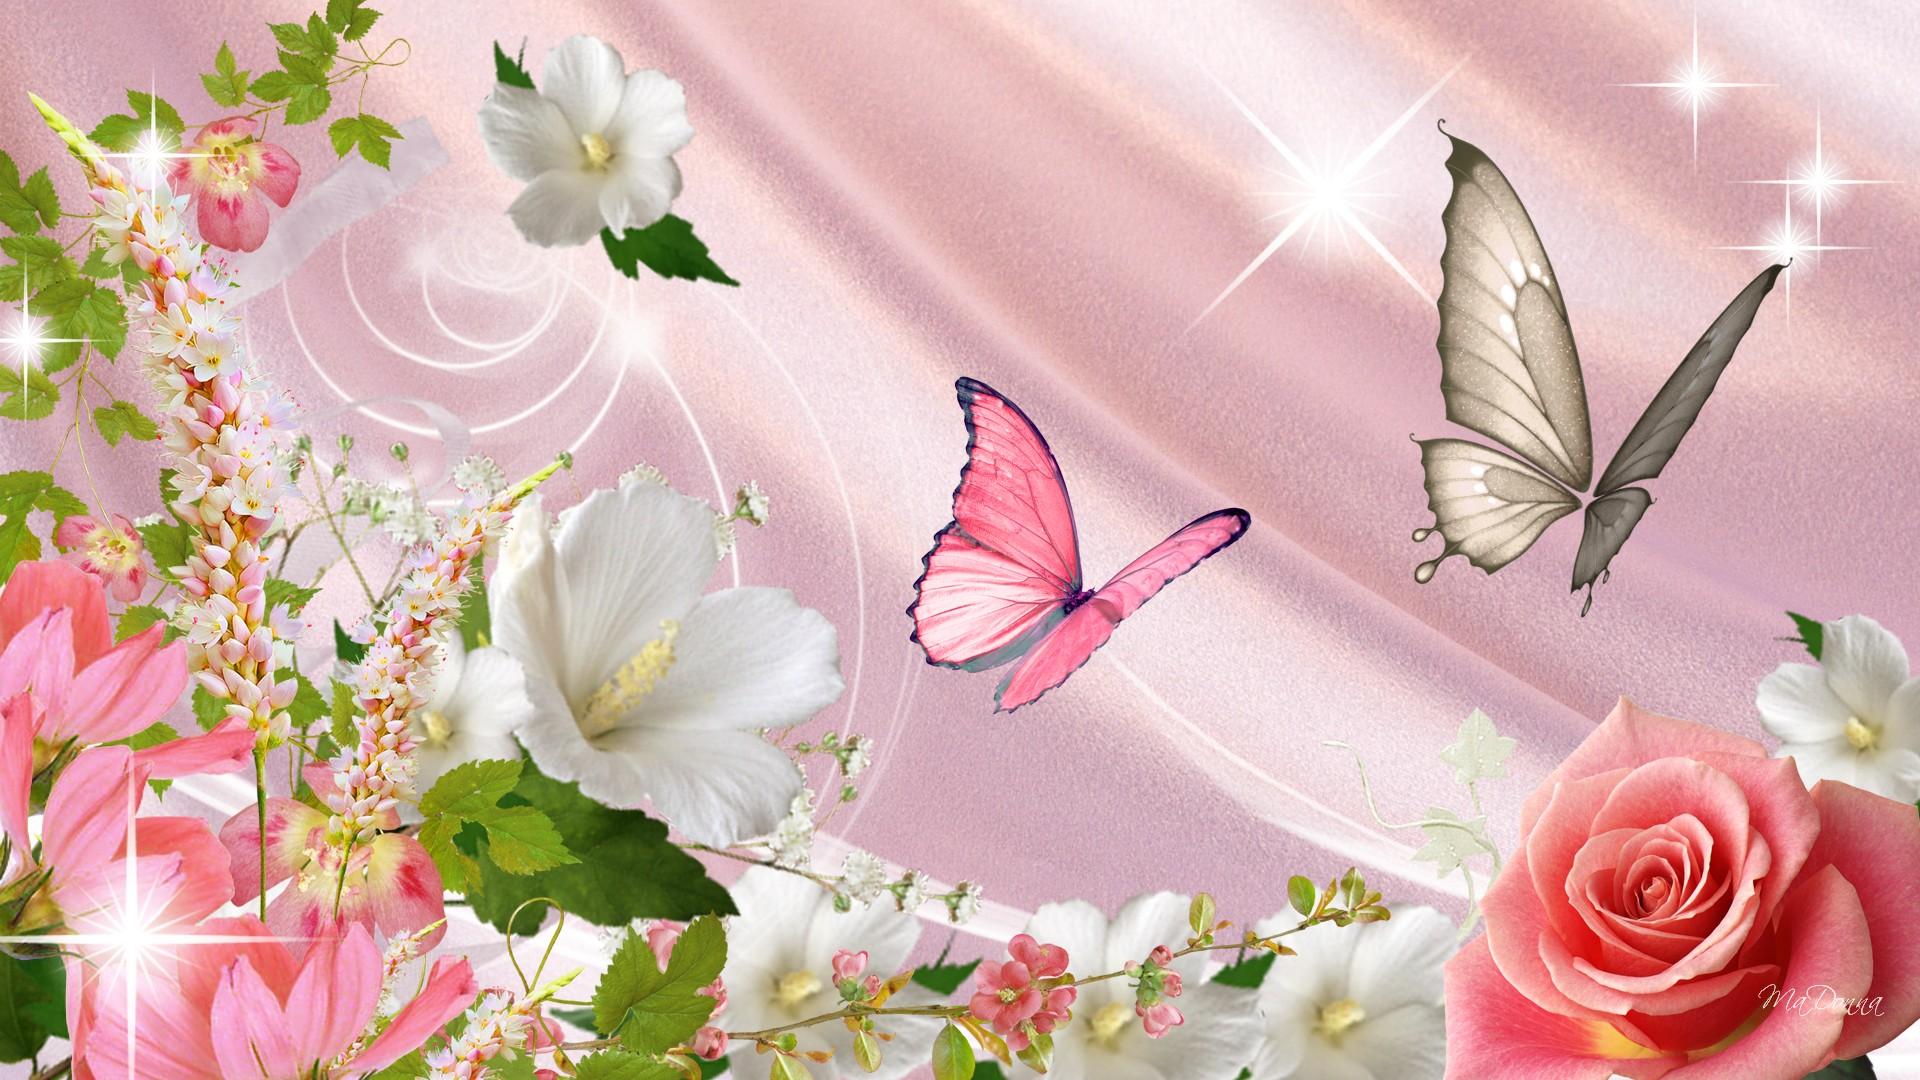 FunMozar Spring Flowers And Butterflies Wallpapers 1920x1080